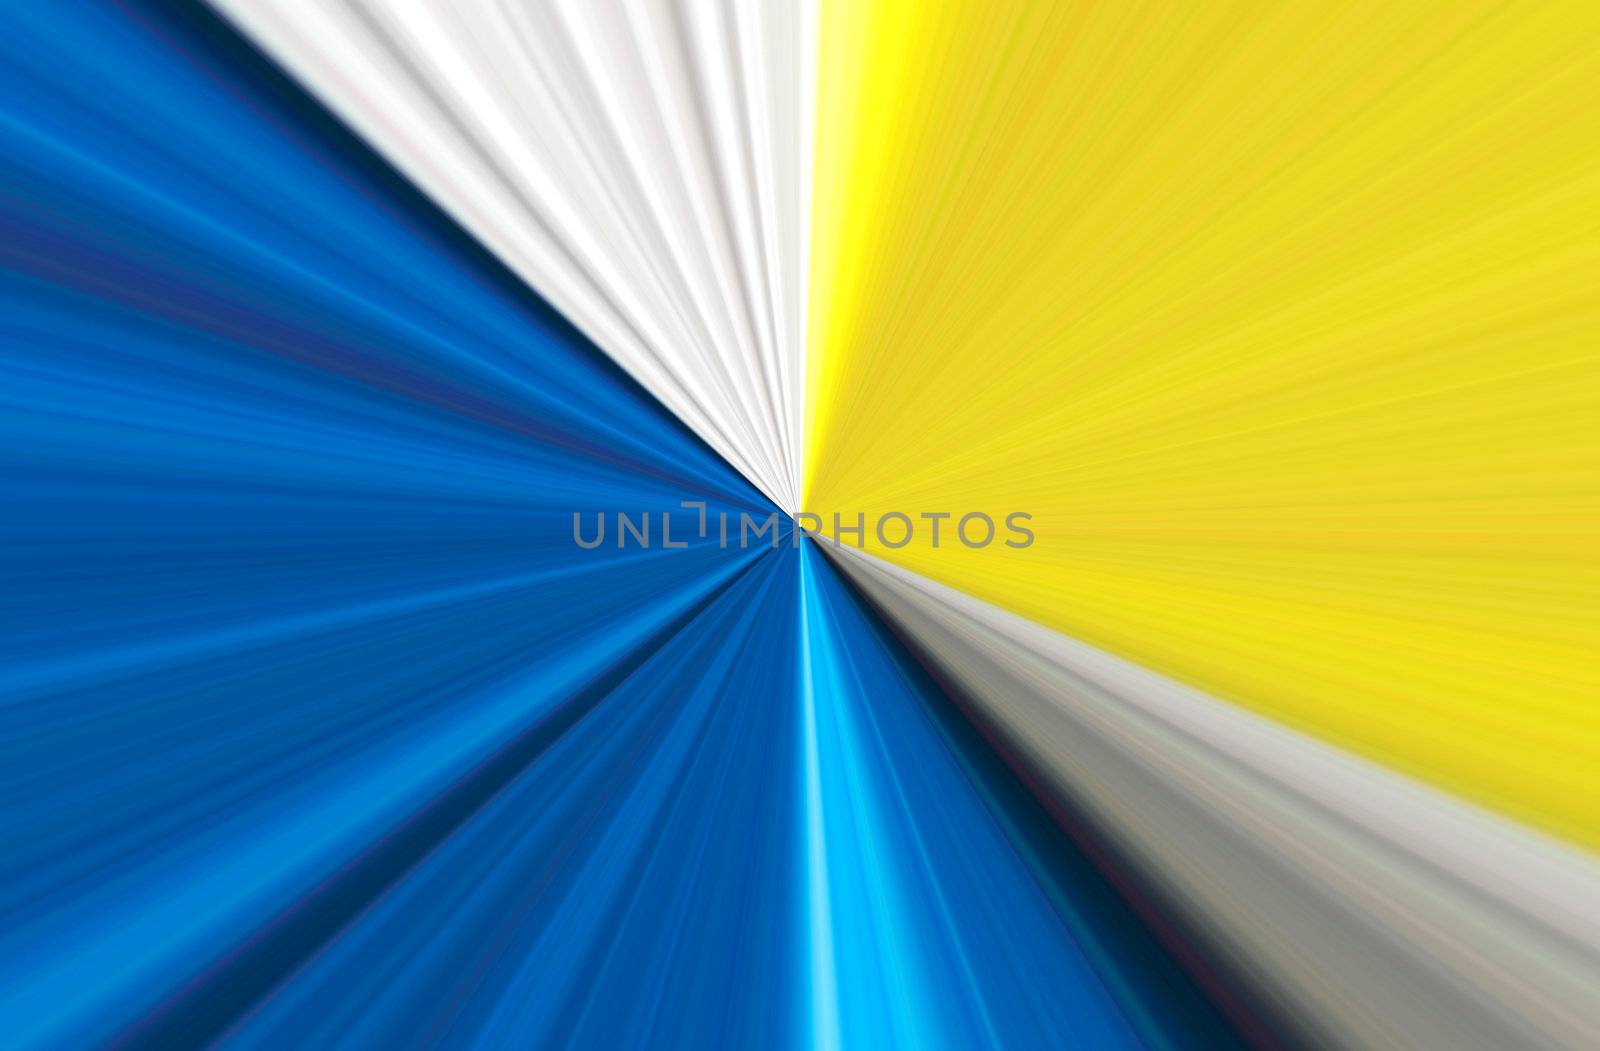 blue, yellow, white and gray abstract resembling travel through a tunnel at high speed